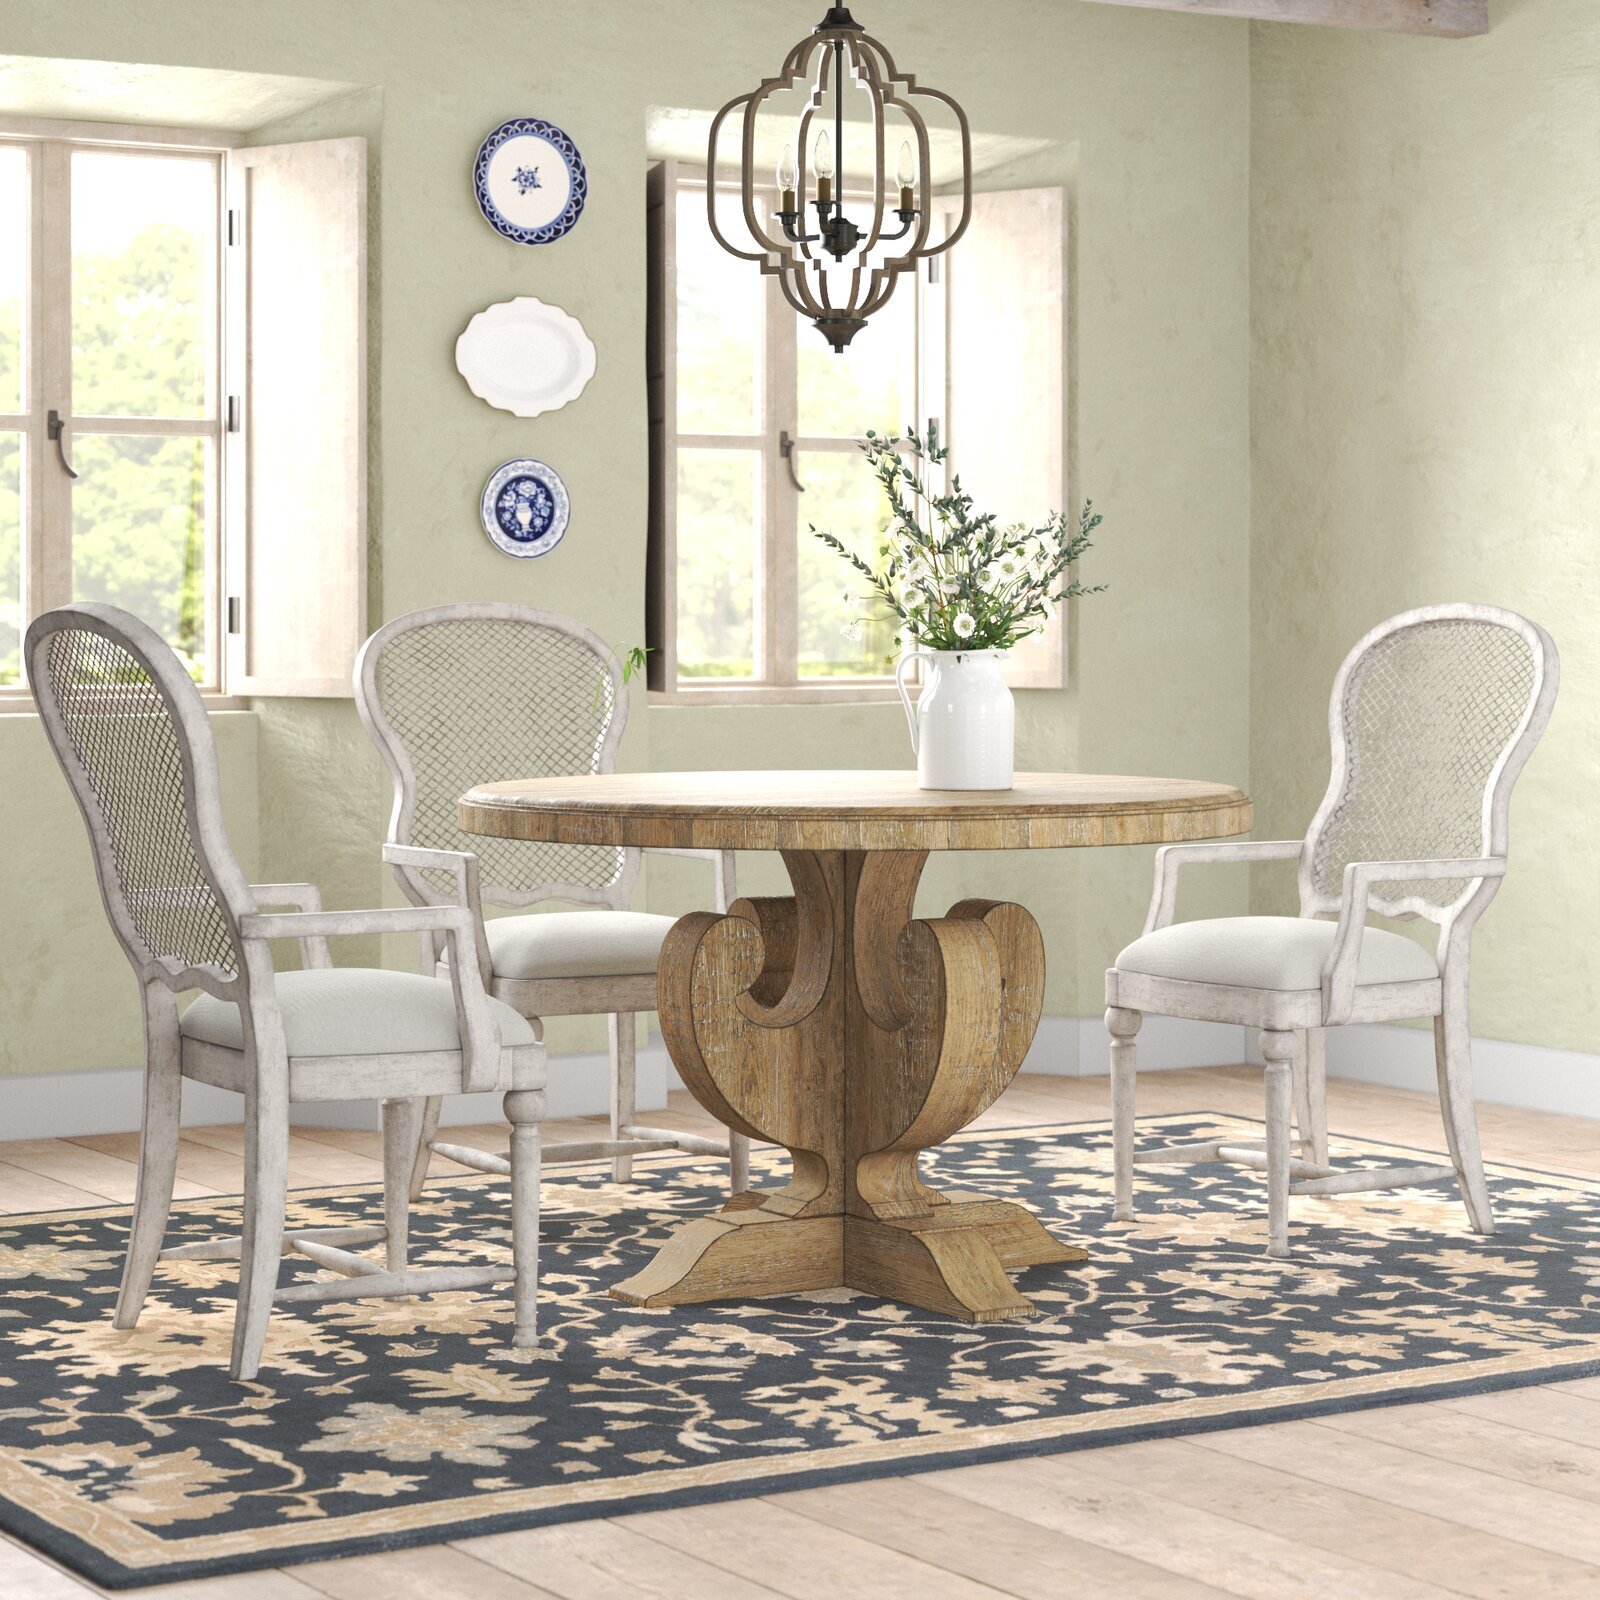 Farmhouse Round Dinette Sets for Small Spaces